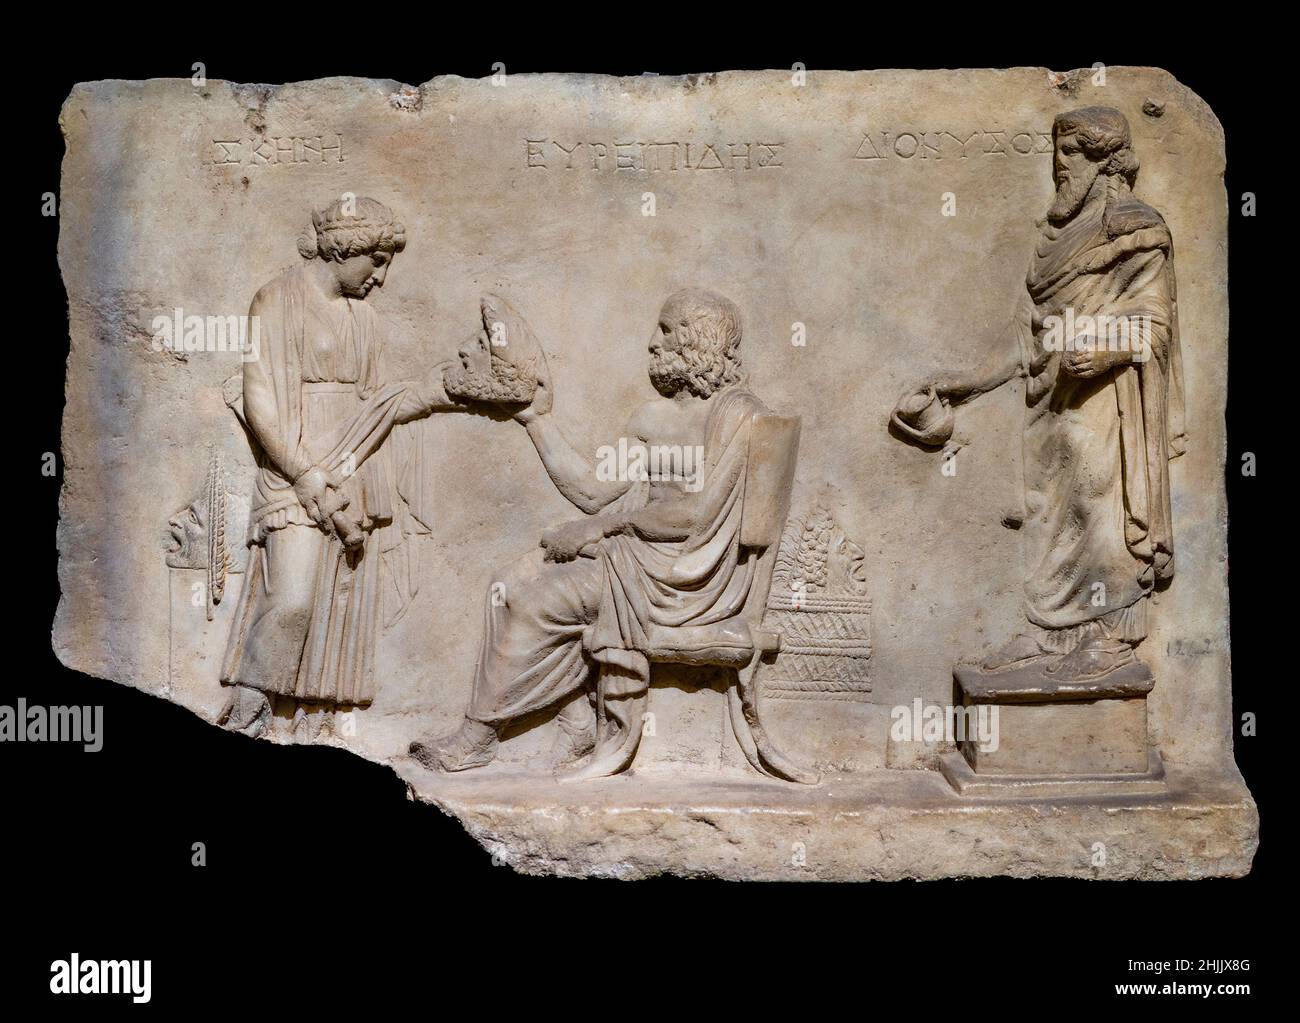 Relief of Euripides, Tragedy writer. 1st century BCE -1st century CE. Istanbul Archaeology Museum. Stock Photo